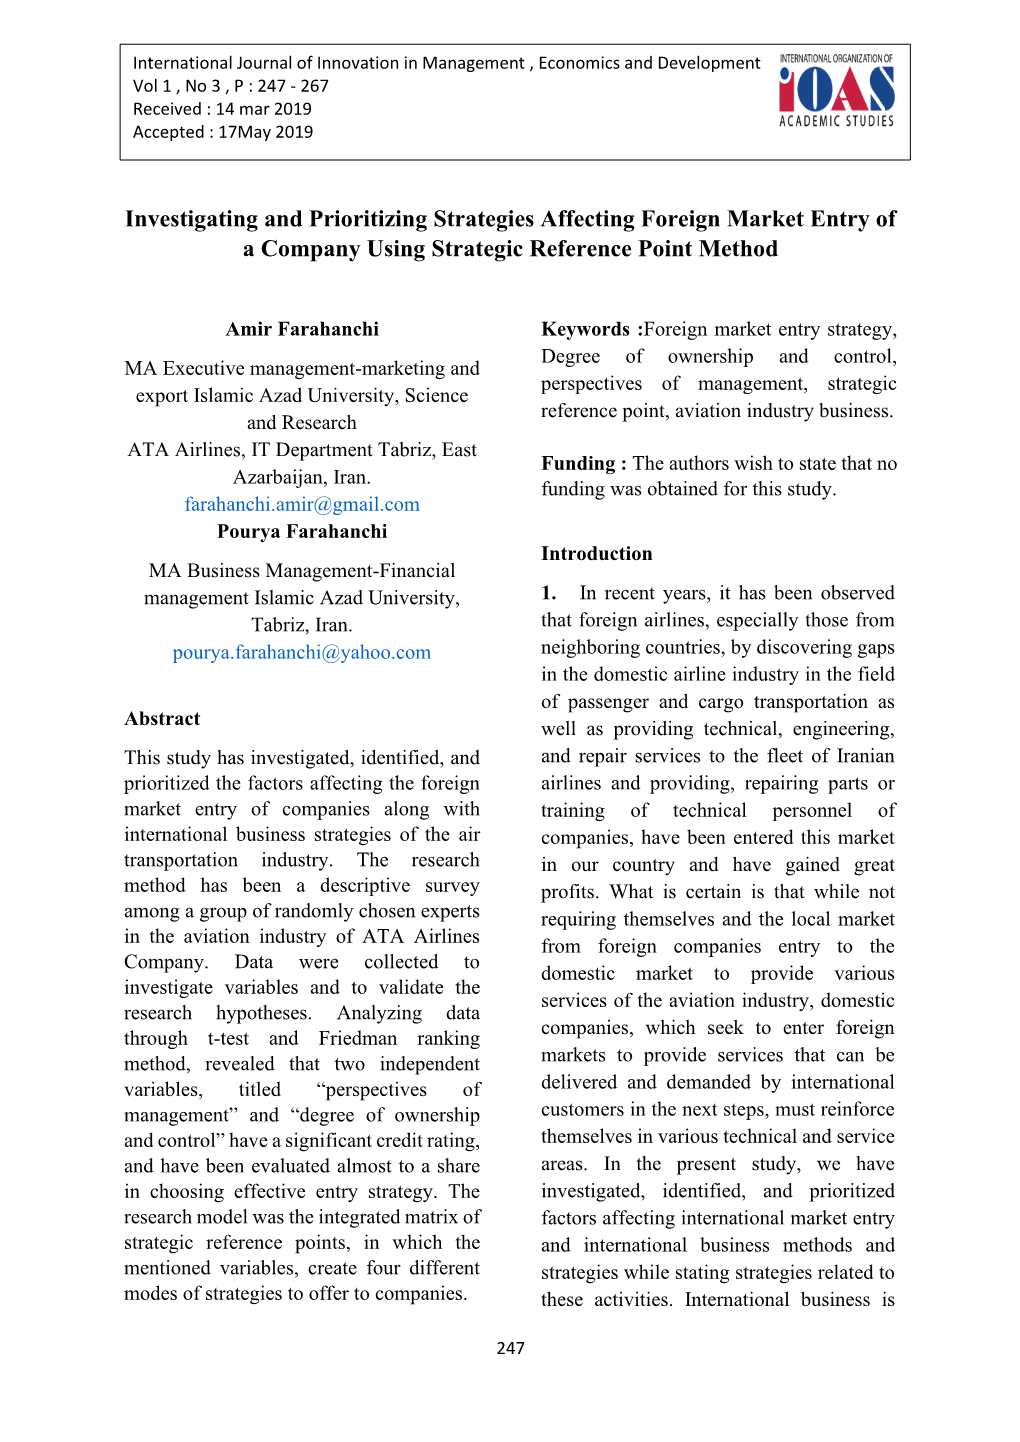 Investigating and Prioritizing Strategies Affecting Foreign Market Entry of a Company Using Strategic Reference Point Method